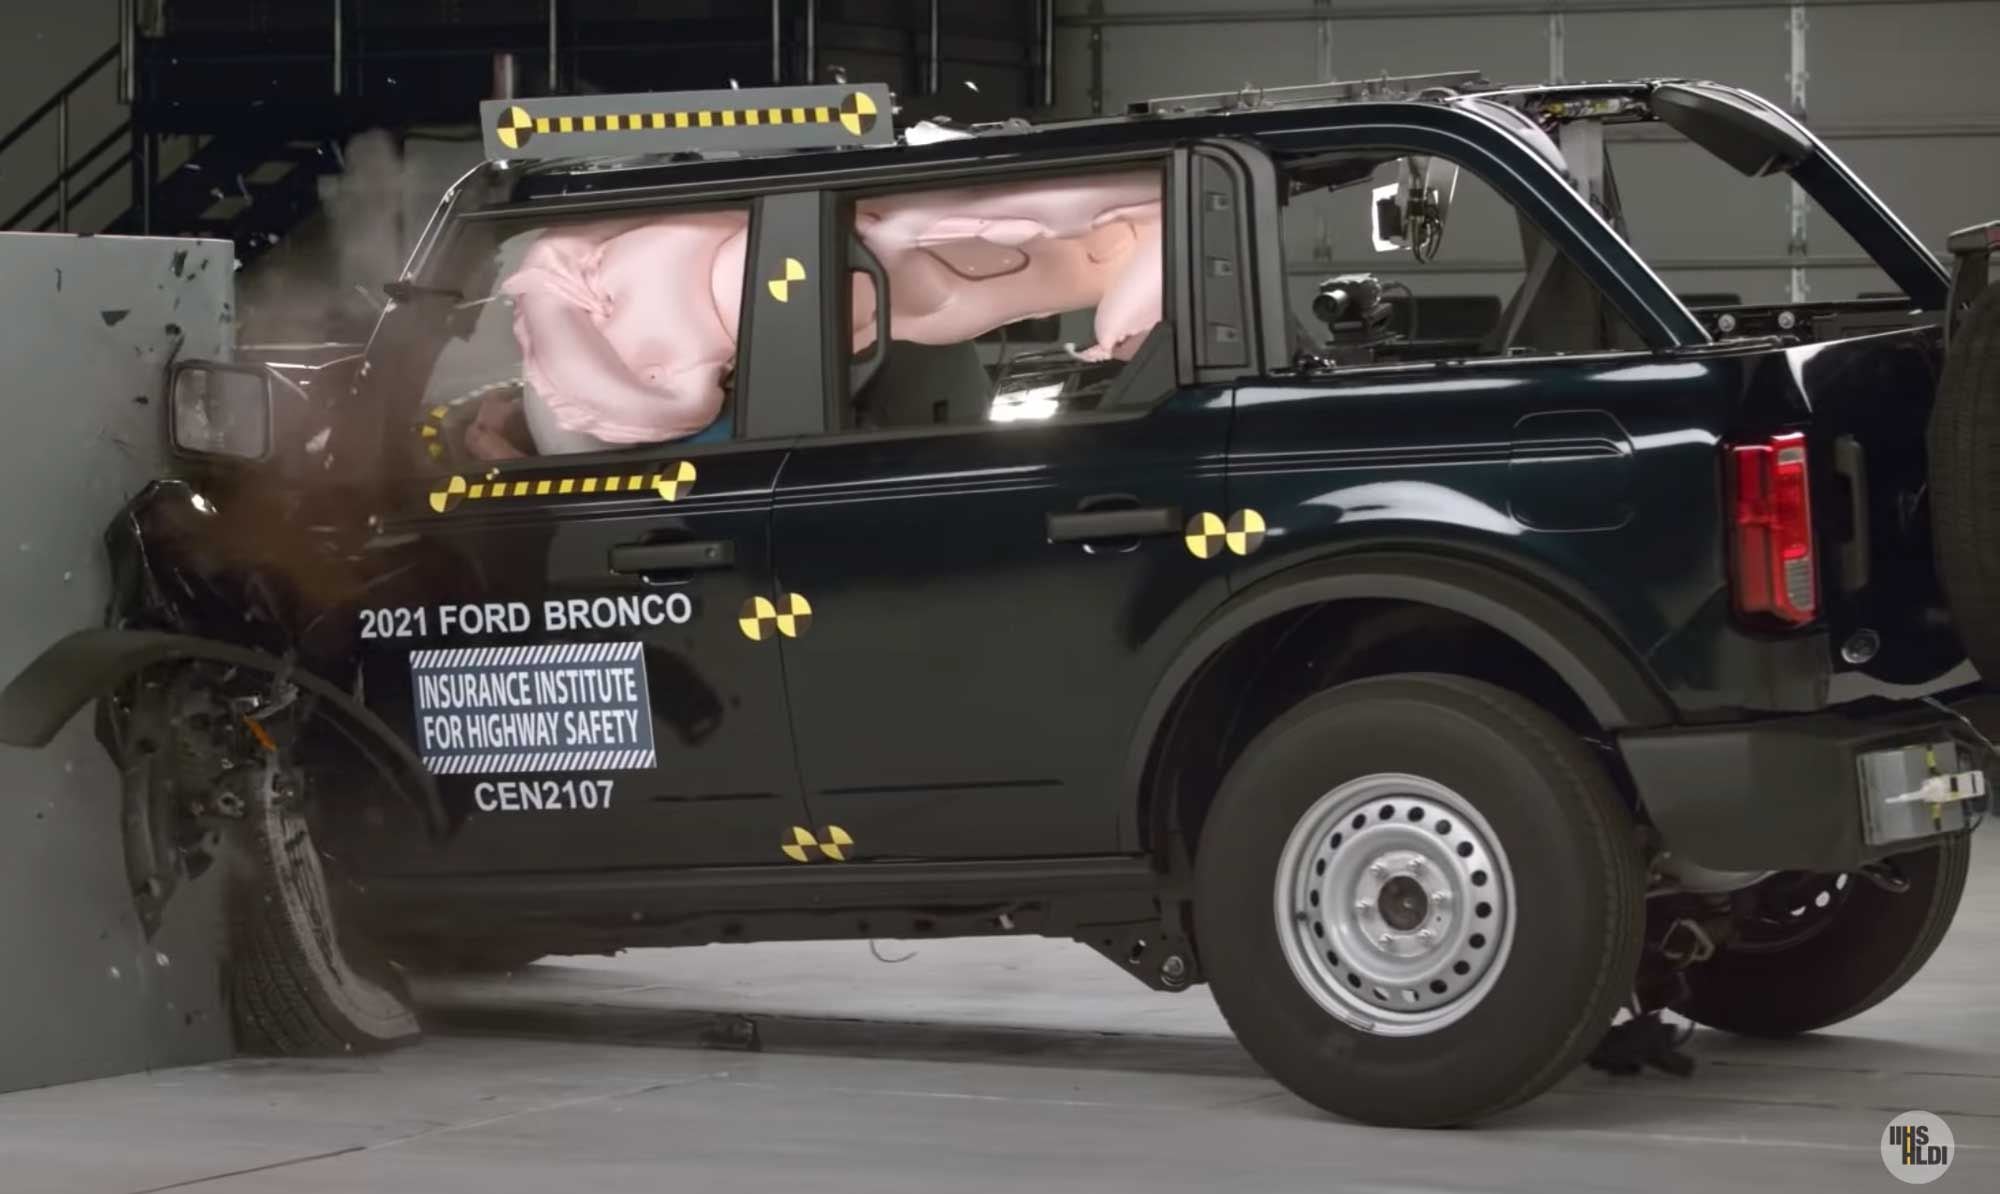 The new Ford Bronco has been crash tested by the IIHS.